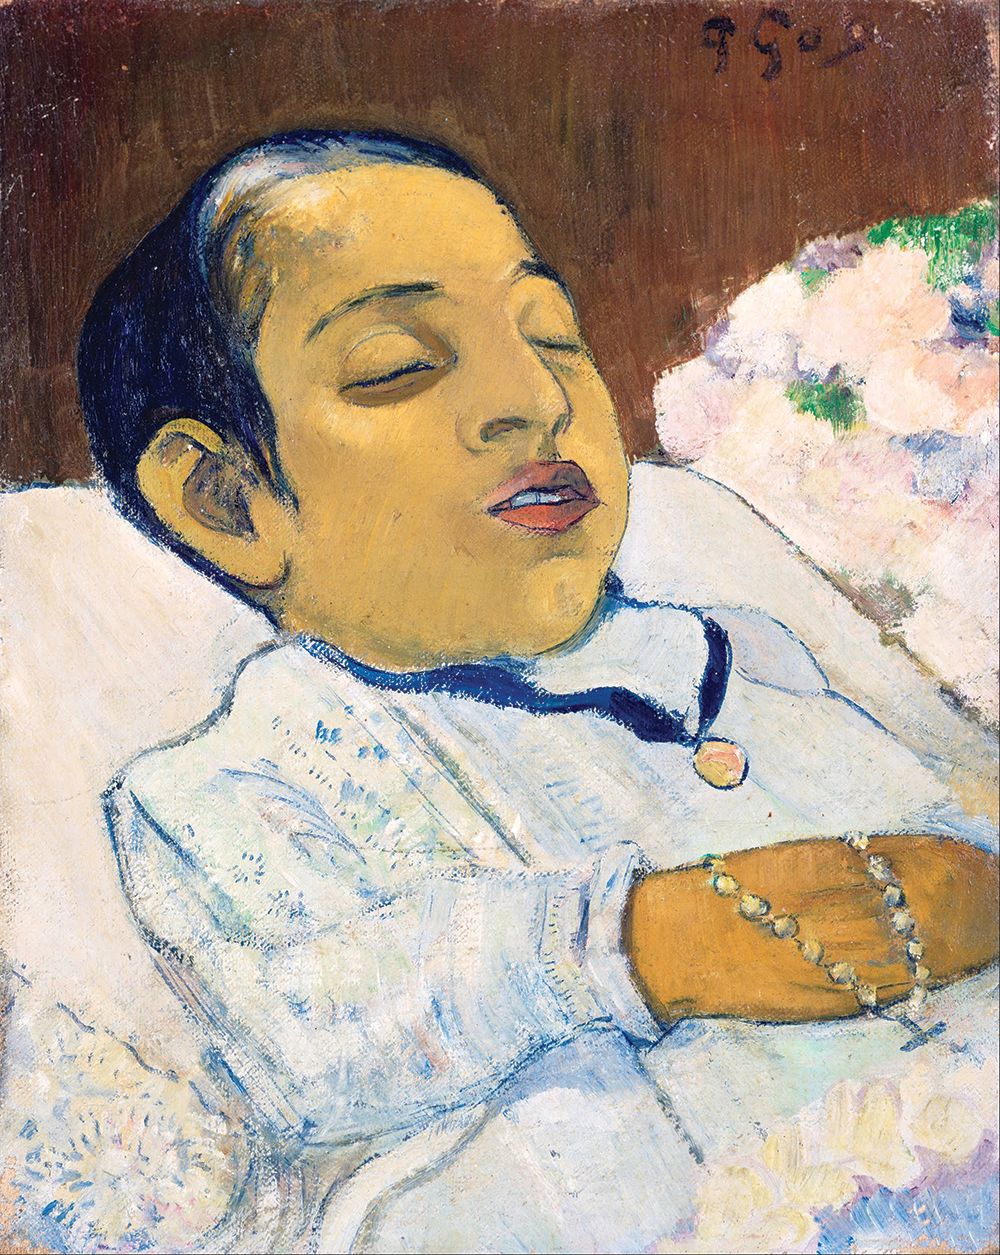 Revealed: the story behind the Gauguin paintings buried with a